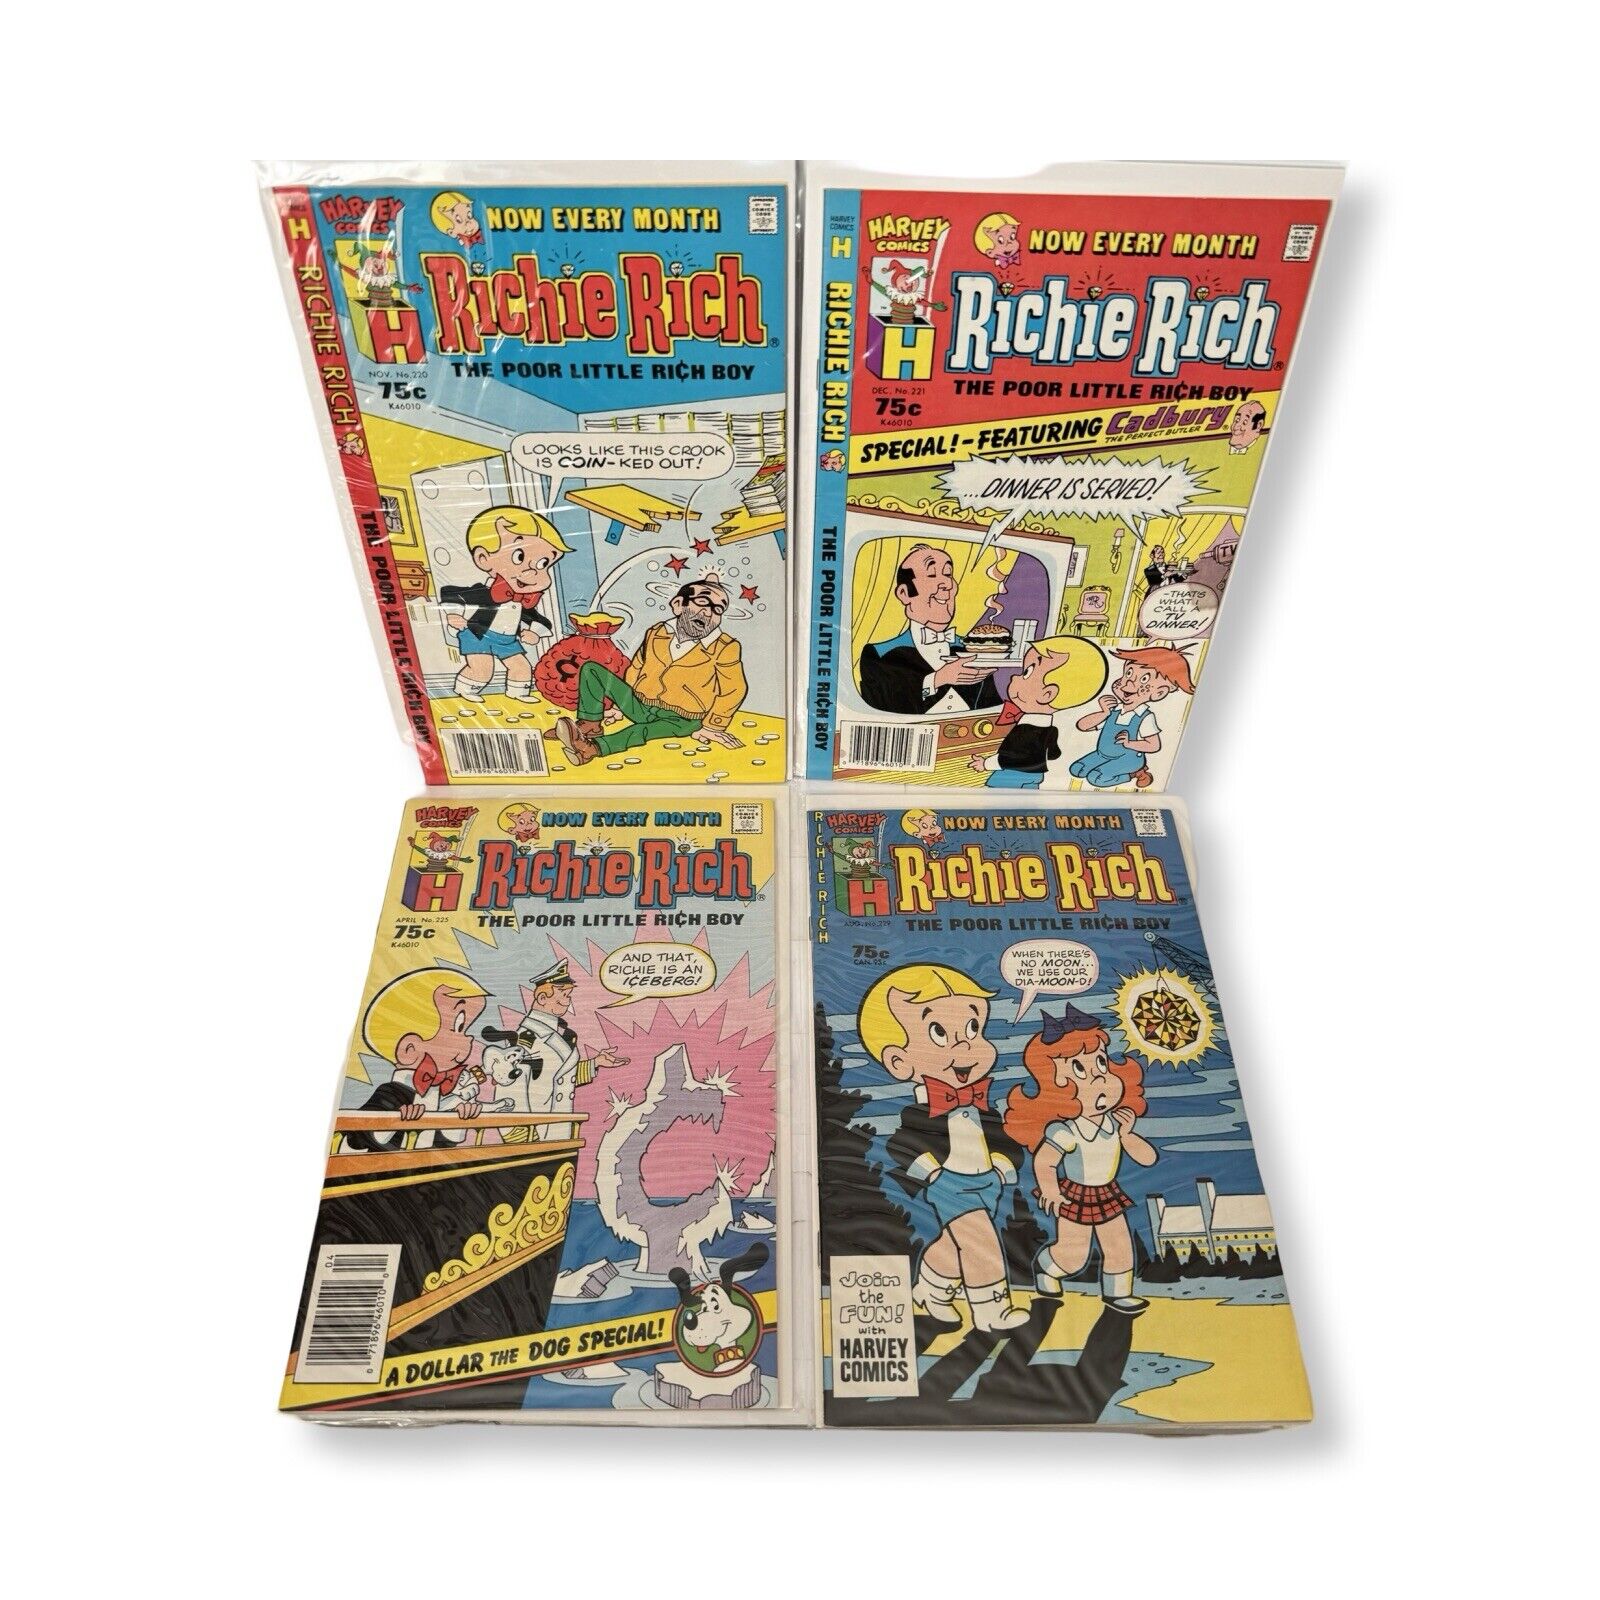 Richie Rich Comic Lot (4 Issues) #220, 221, 225, 229 1986-1987 NM/VF Condition